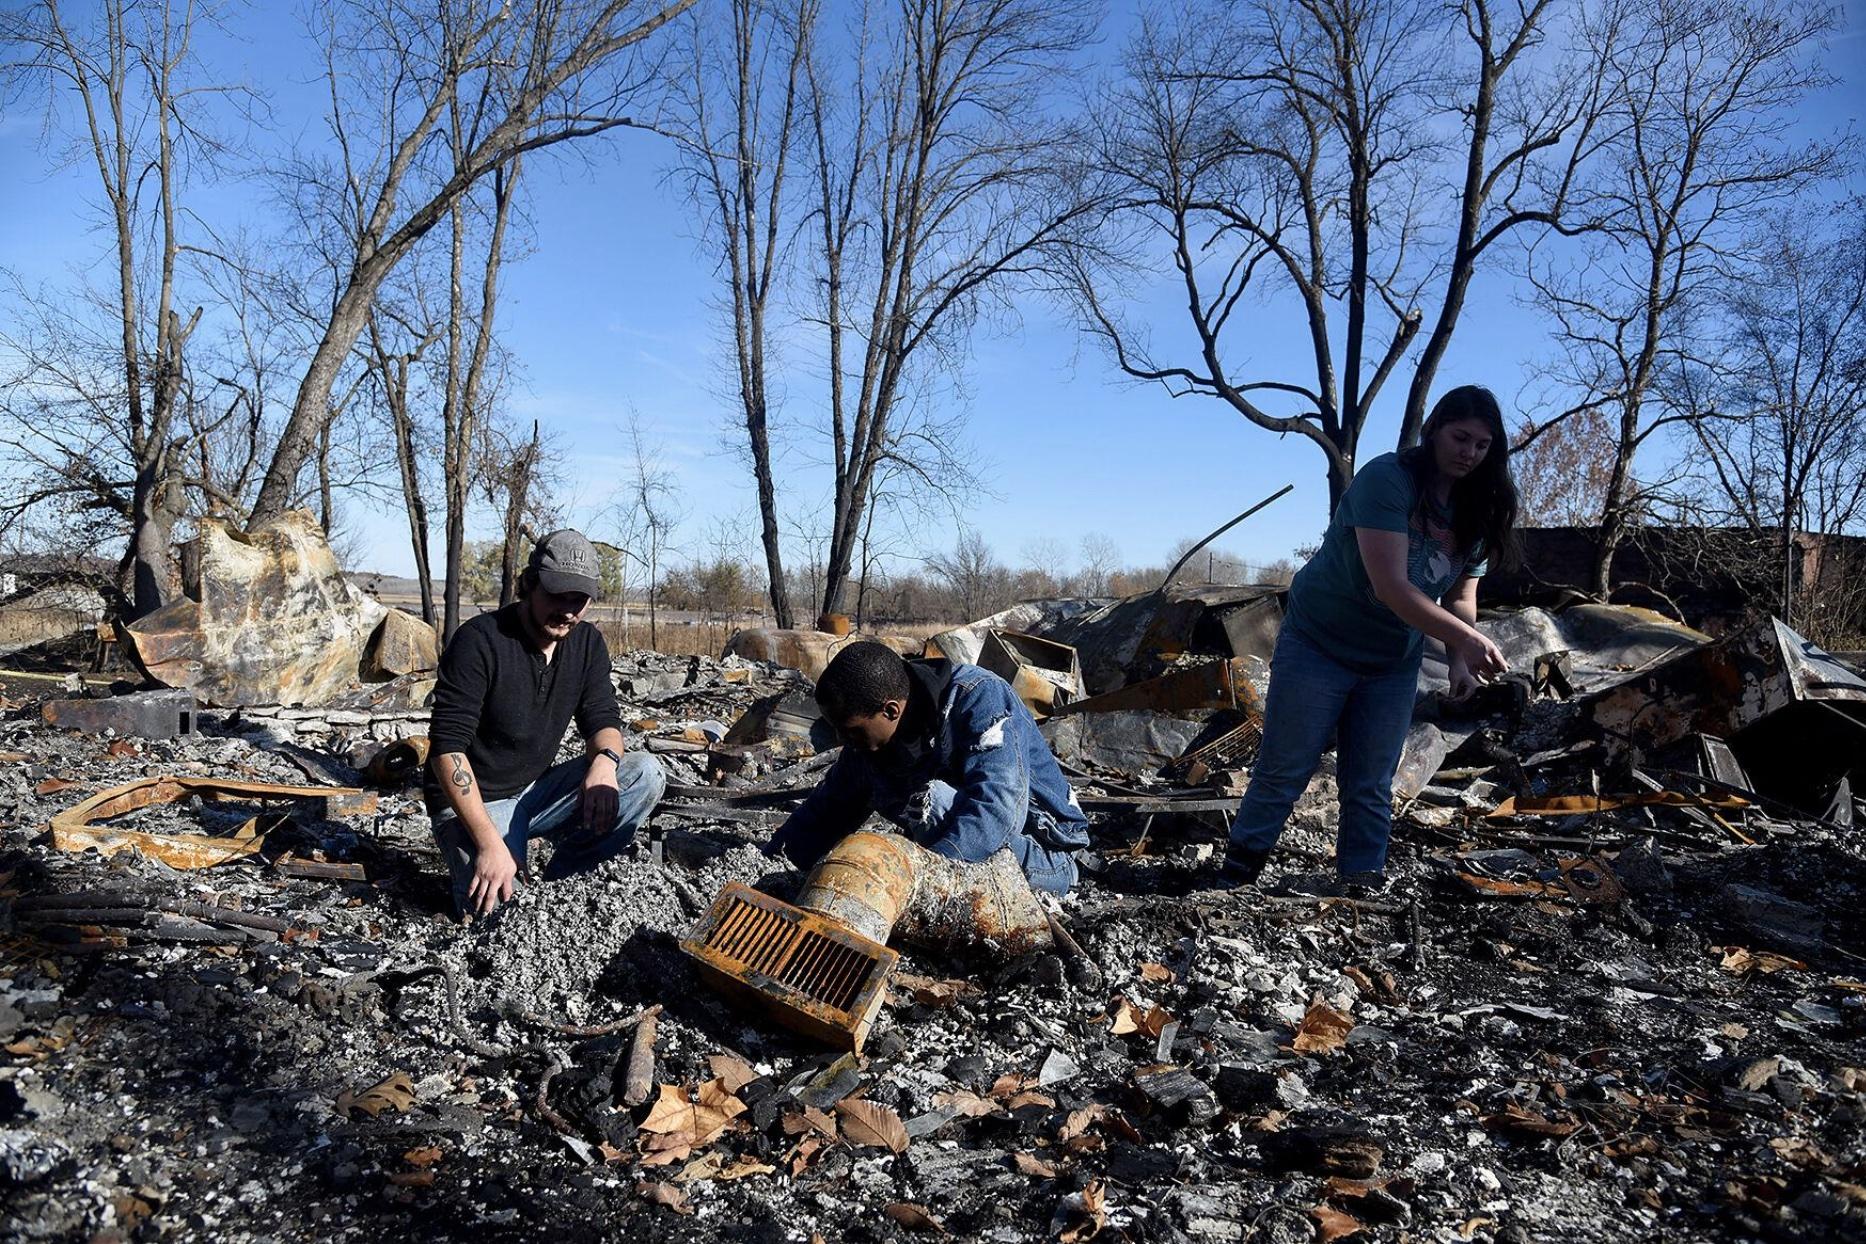 No relief:  Lack of government help leaves fire survivors relying on donations - From left, Matthew Colbert, Drew Alexander and Heaven...